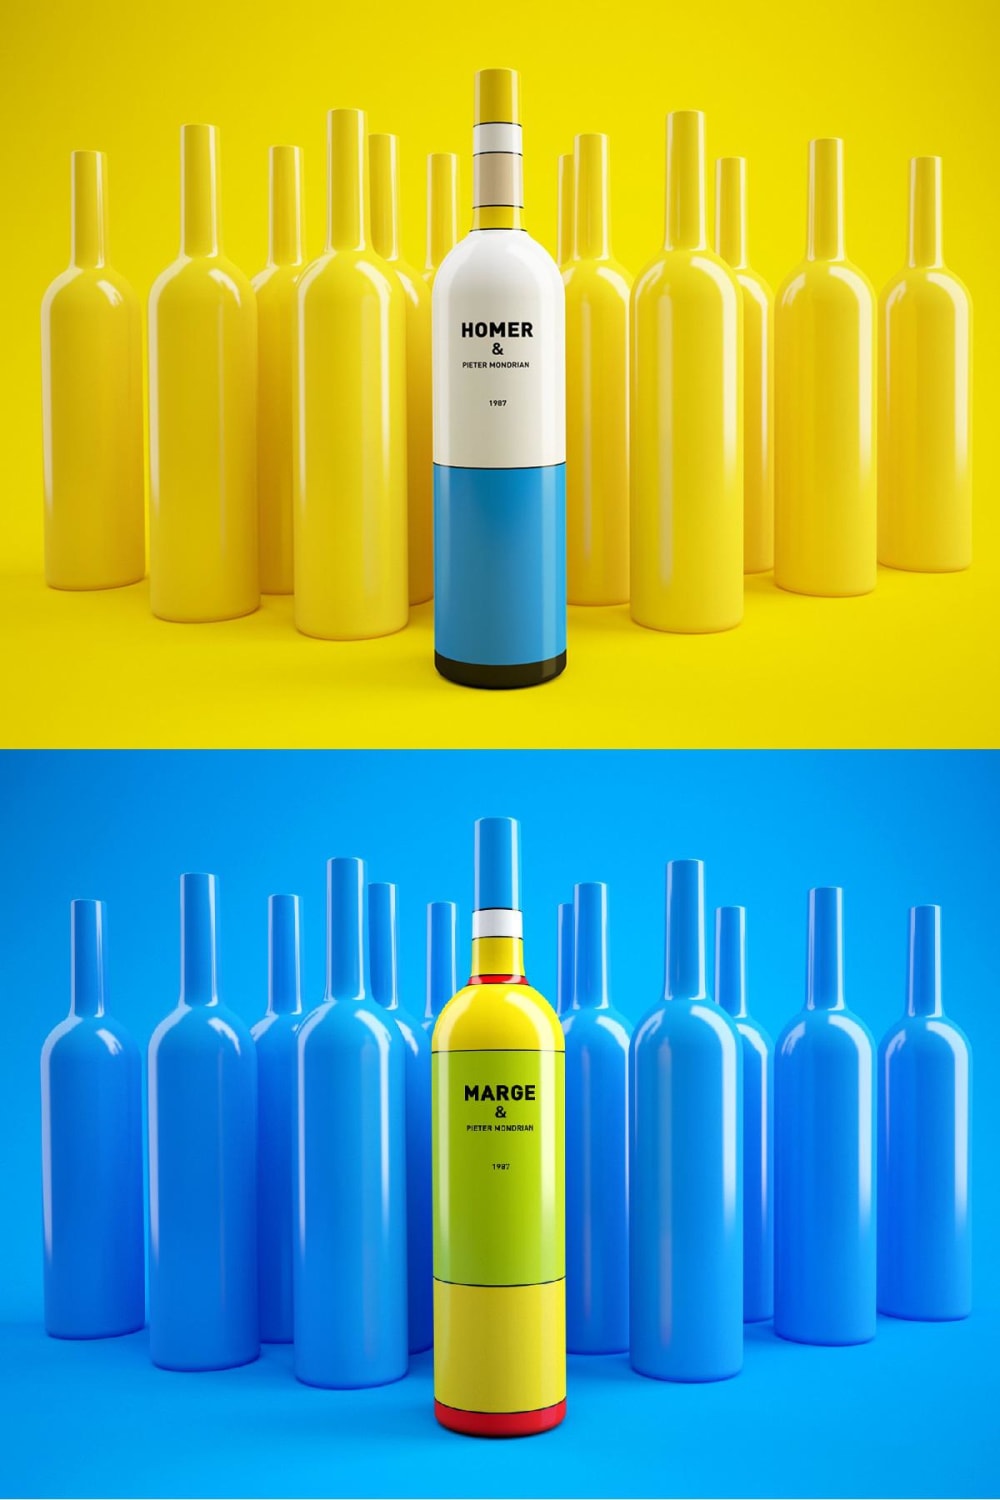 Wine, inspired by The Simpsons and Piet Mondrian (By Bolimond and Patsukevich)